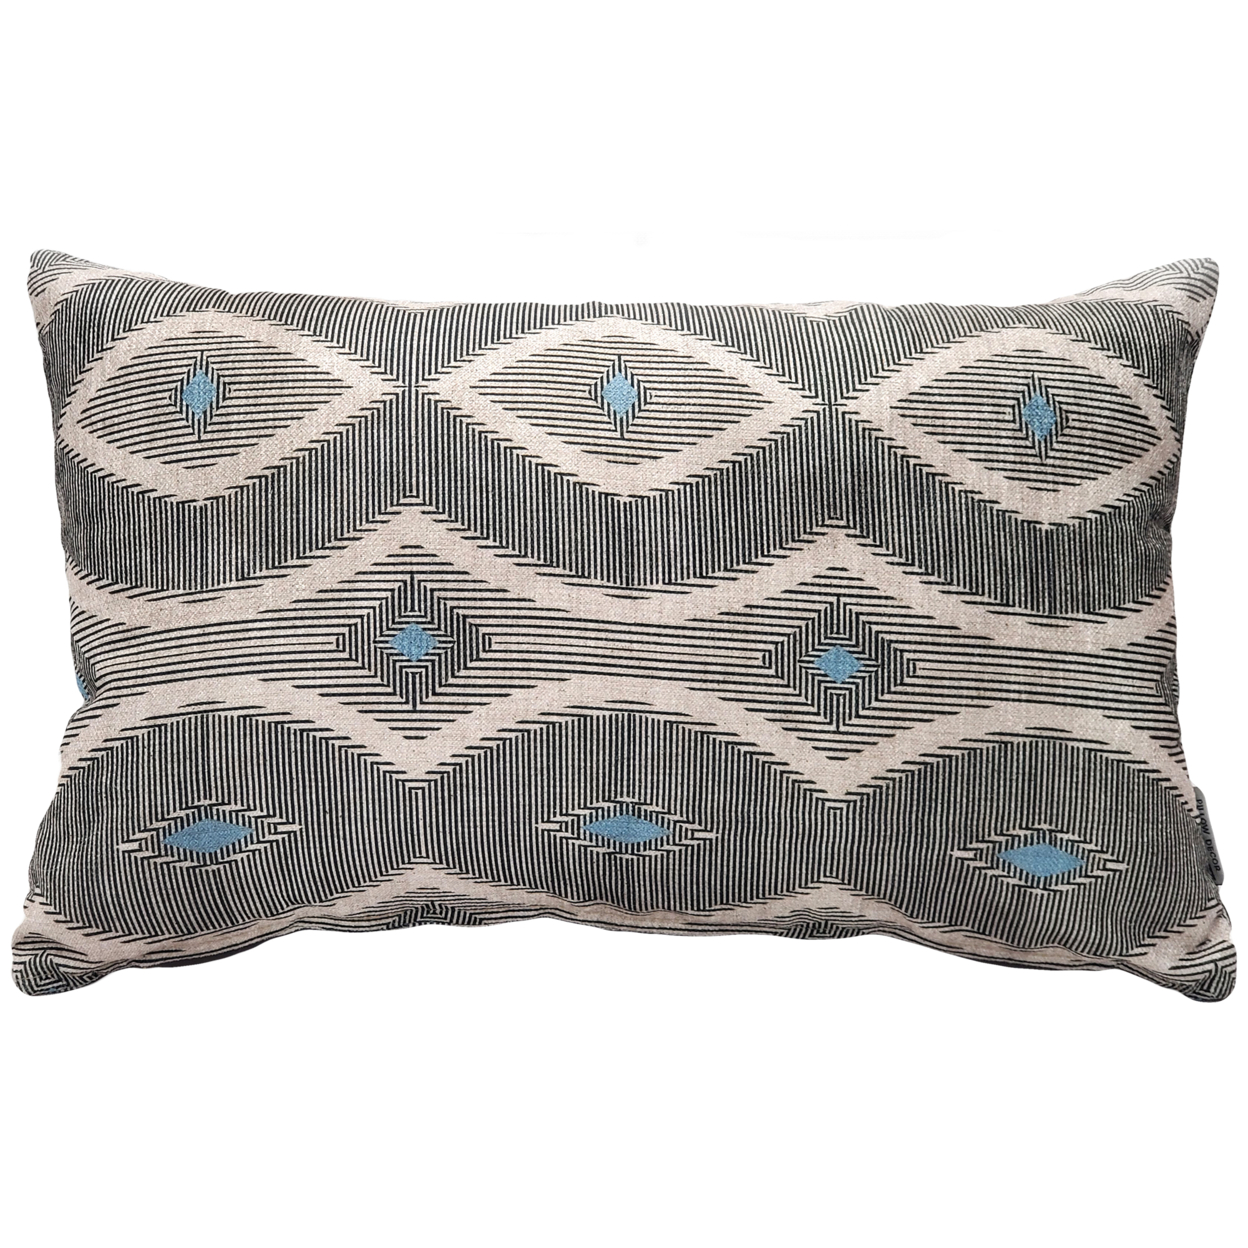 Desmond Blue Diamond Pillow 12x20 Inches Square, Complete Pillow with Polyfill Pillow Insert